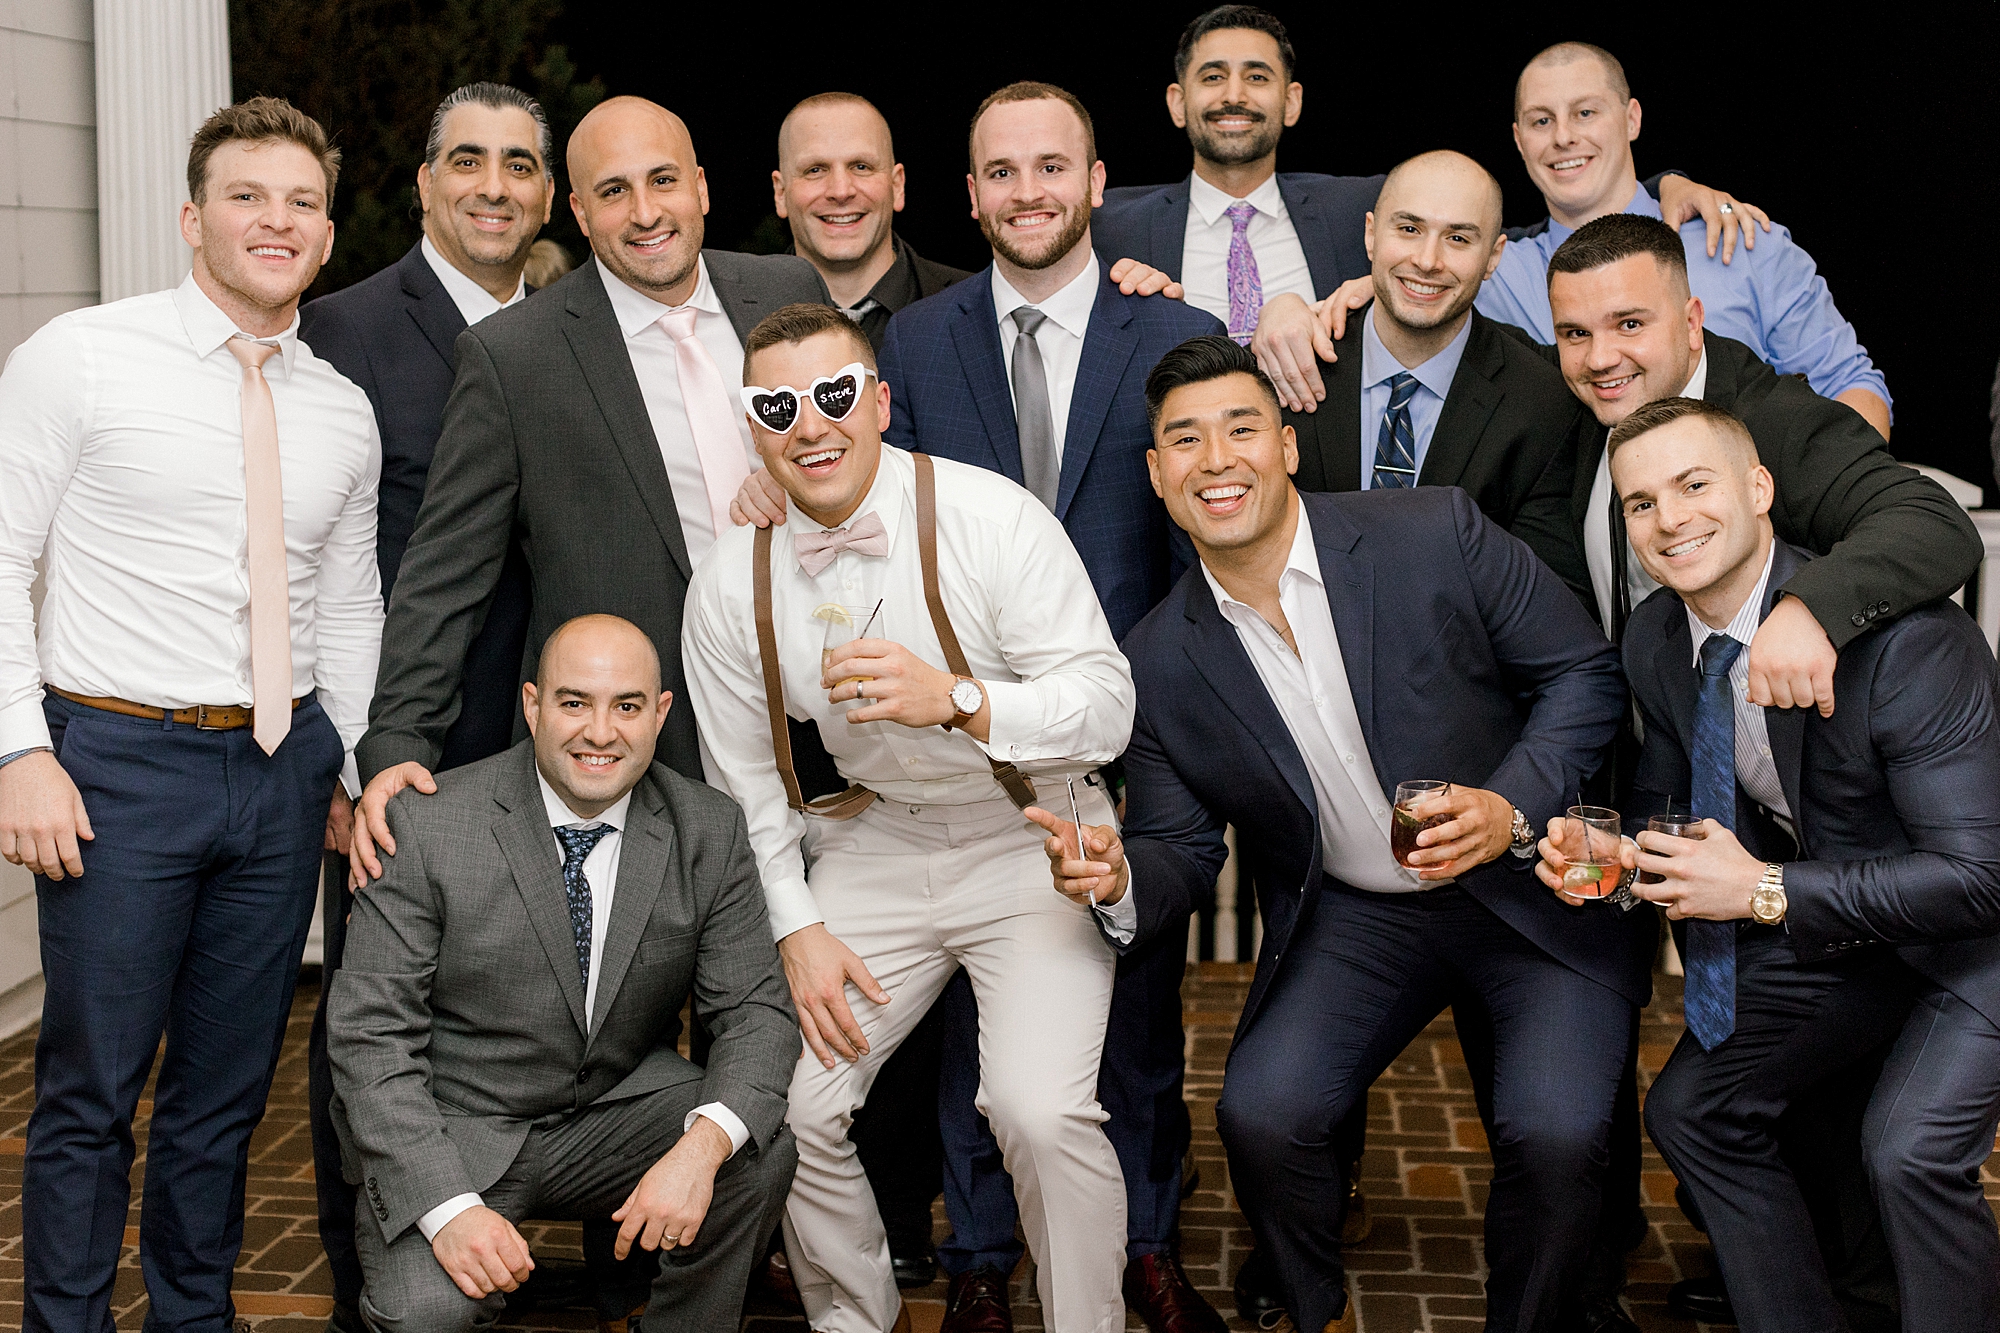 groom poses with groomsmen at reception wearing sunglasses